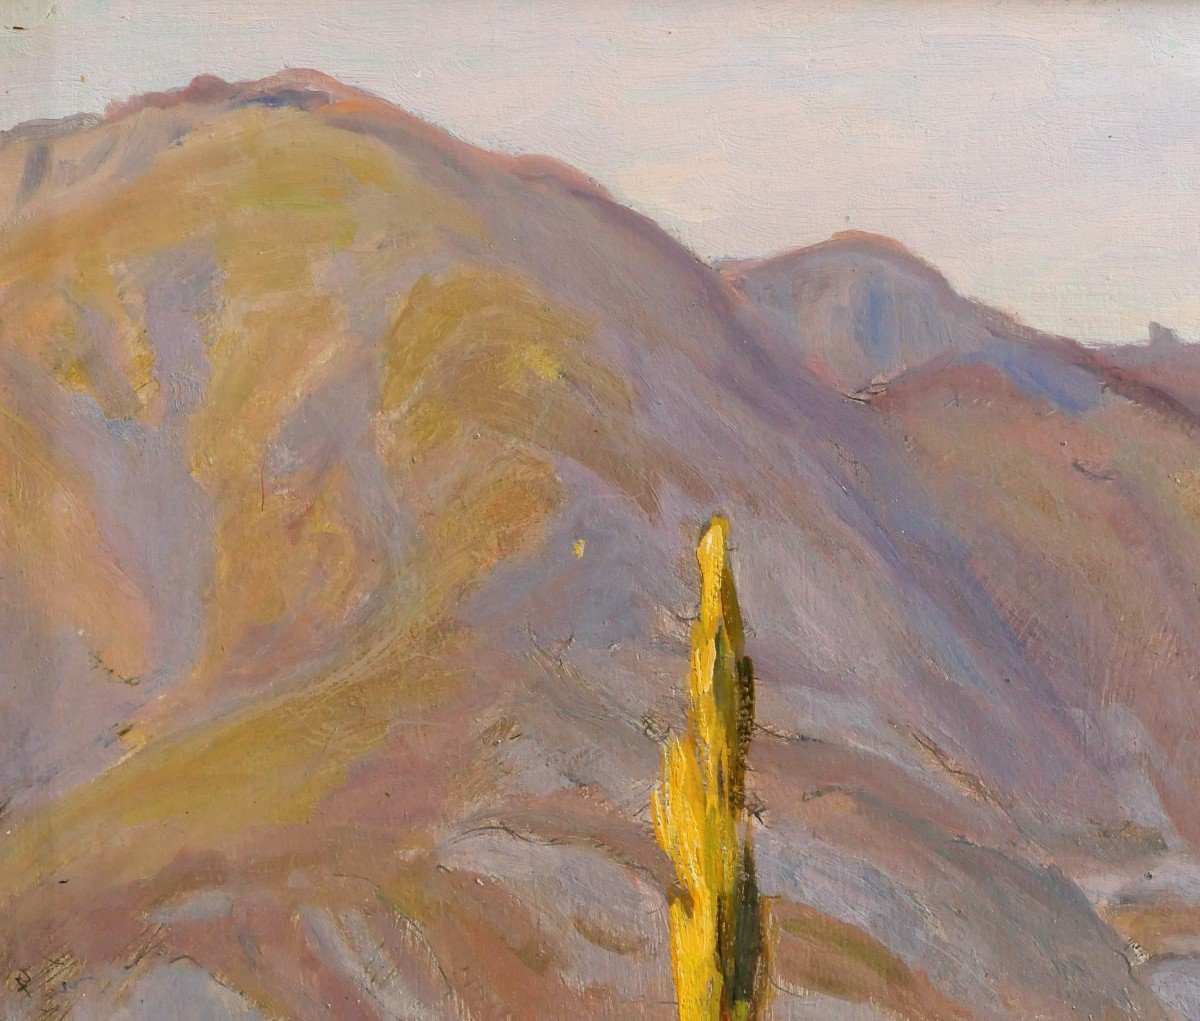 Charles Wislin (1852-1932) Landscape Of Argelès-gazost (pyrenees), Painting, 1919-photo-1